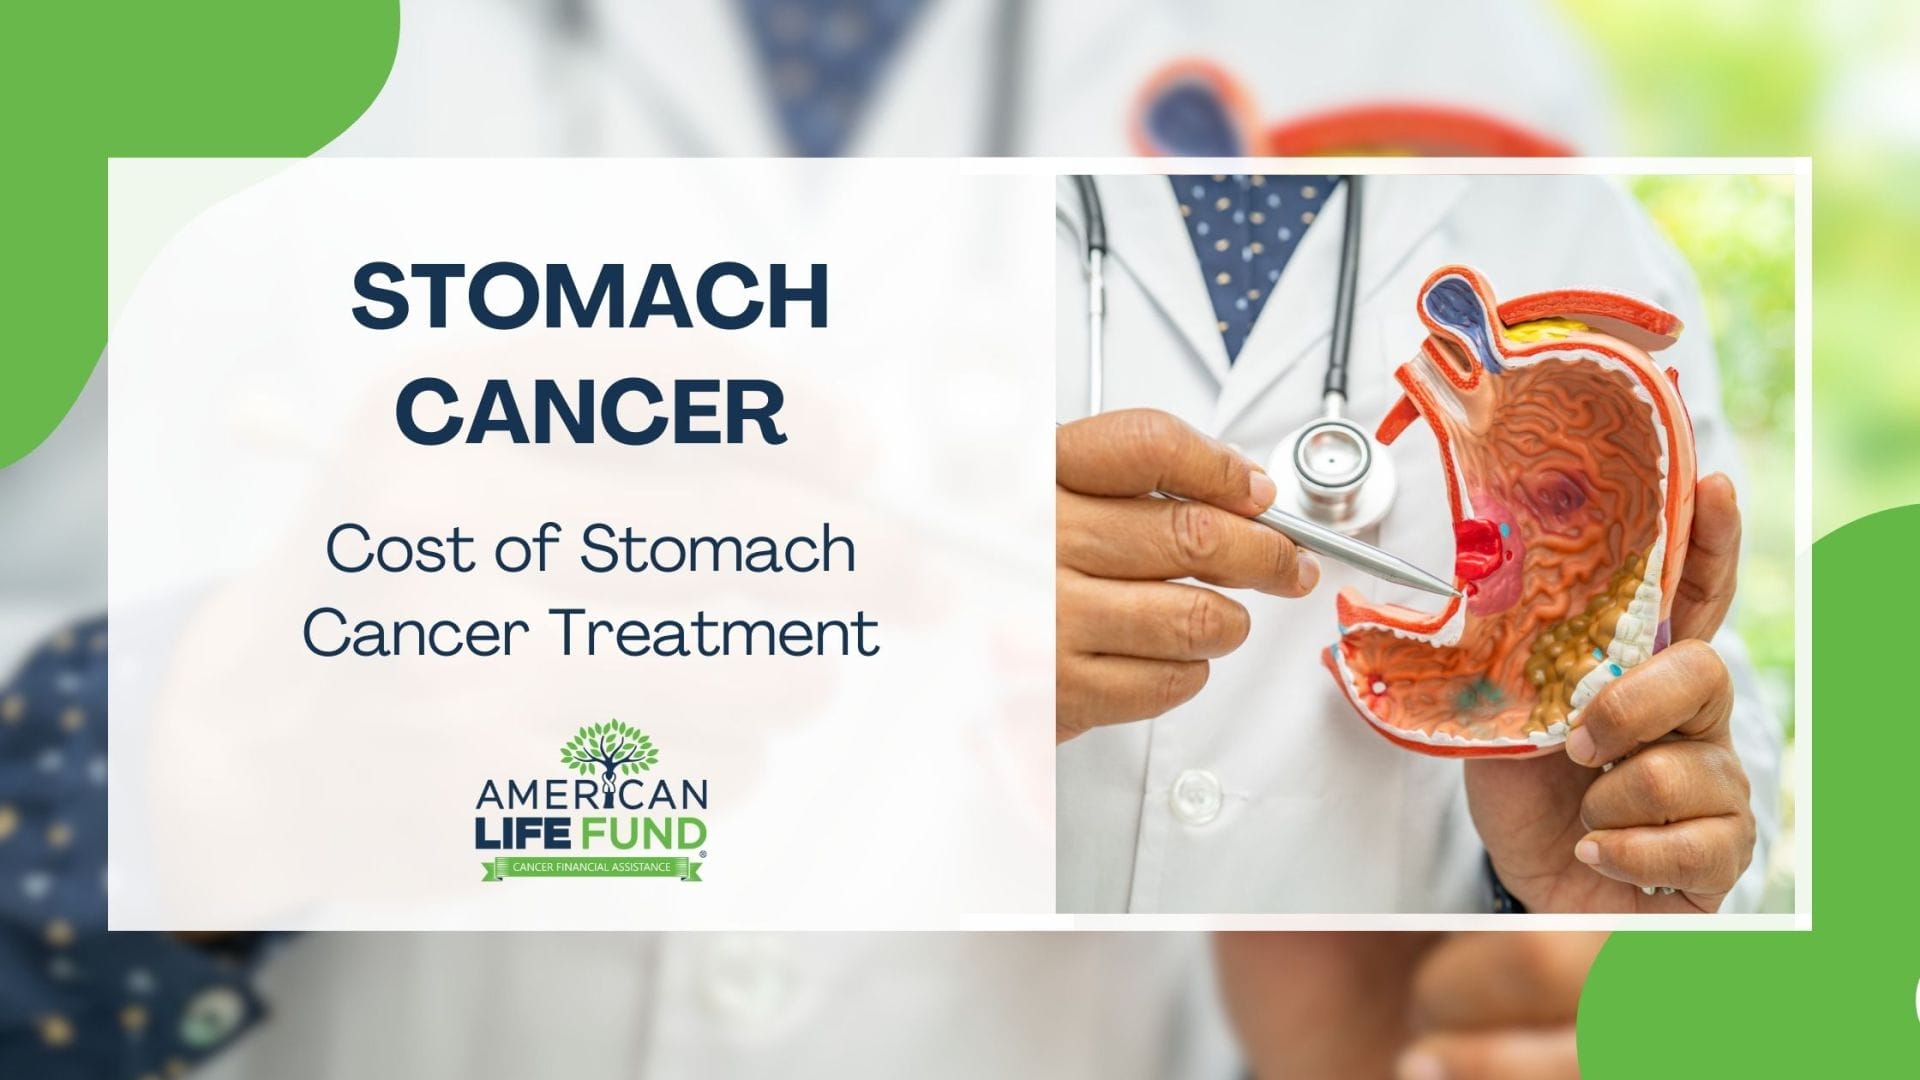 An educational image displaying a doctor with a stethoscope examining a 3D model of the stomach, illustrating a medical consultation for stomach cancer. Accompanying text reads 'STOMACH CANCER - Cost of Stomach Cancer Treatment' with the American Life Fund logo, emphasizing financial assistance options for stomach cancer treatment costs.